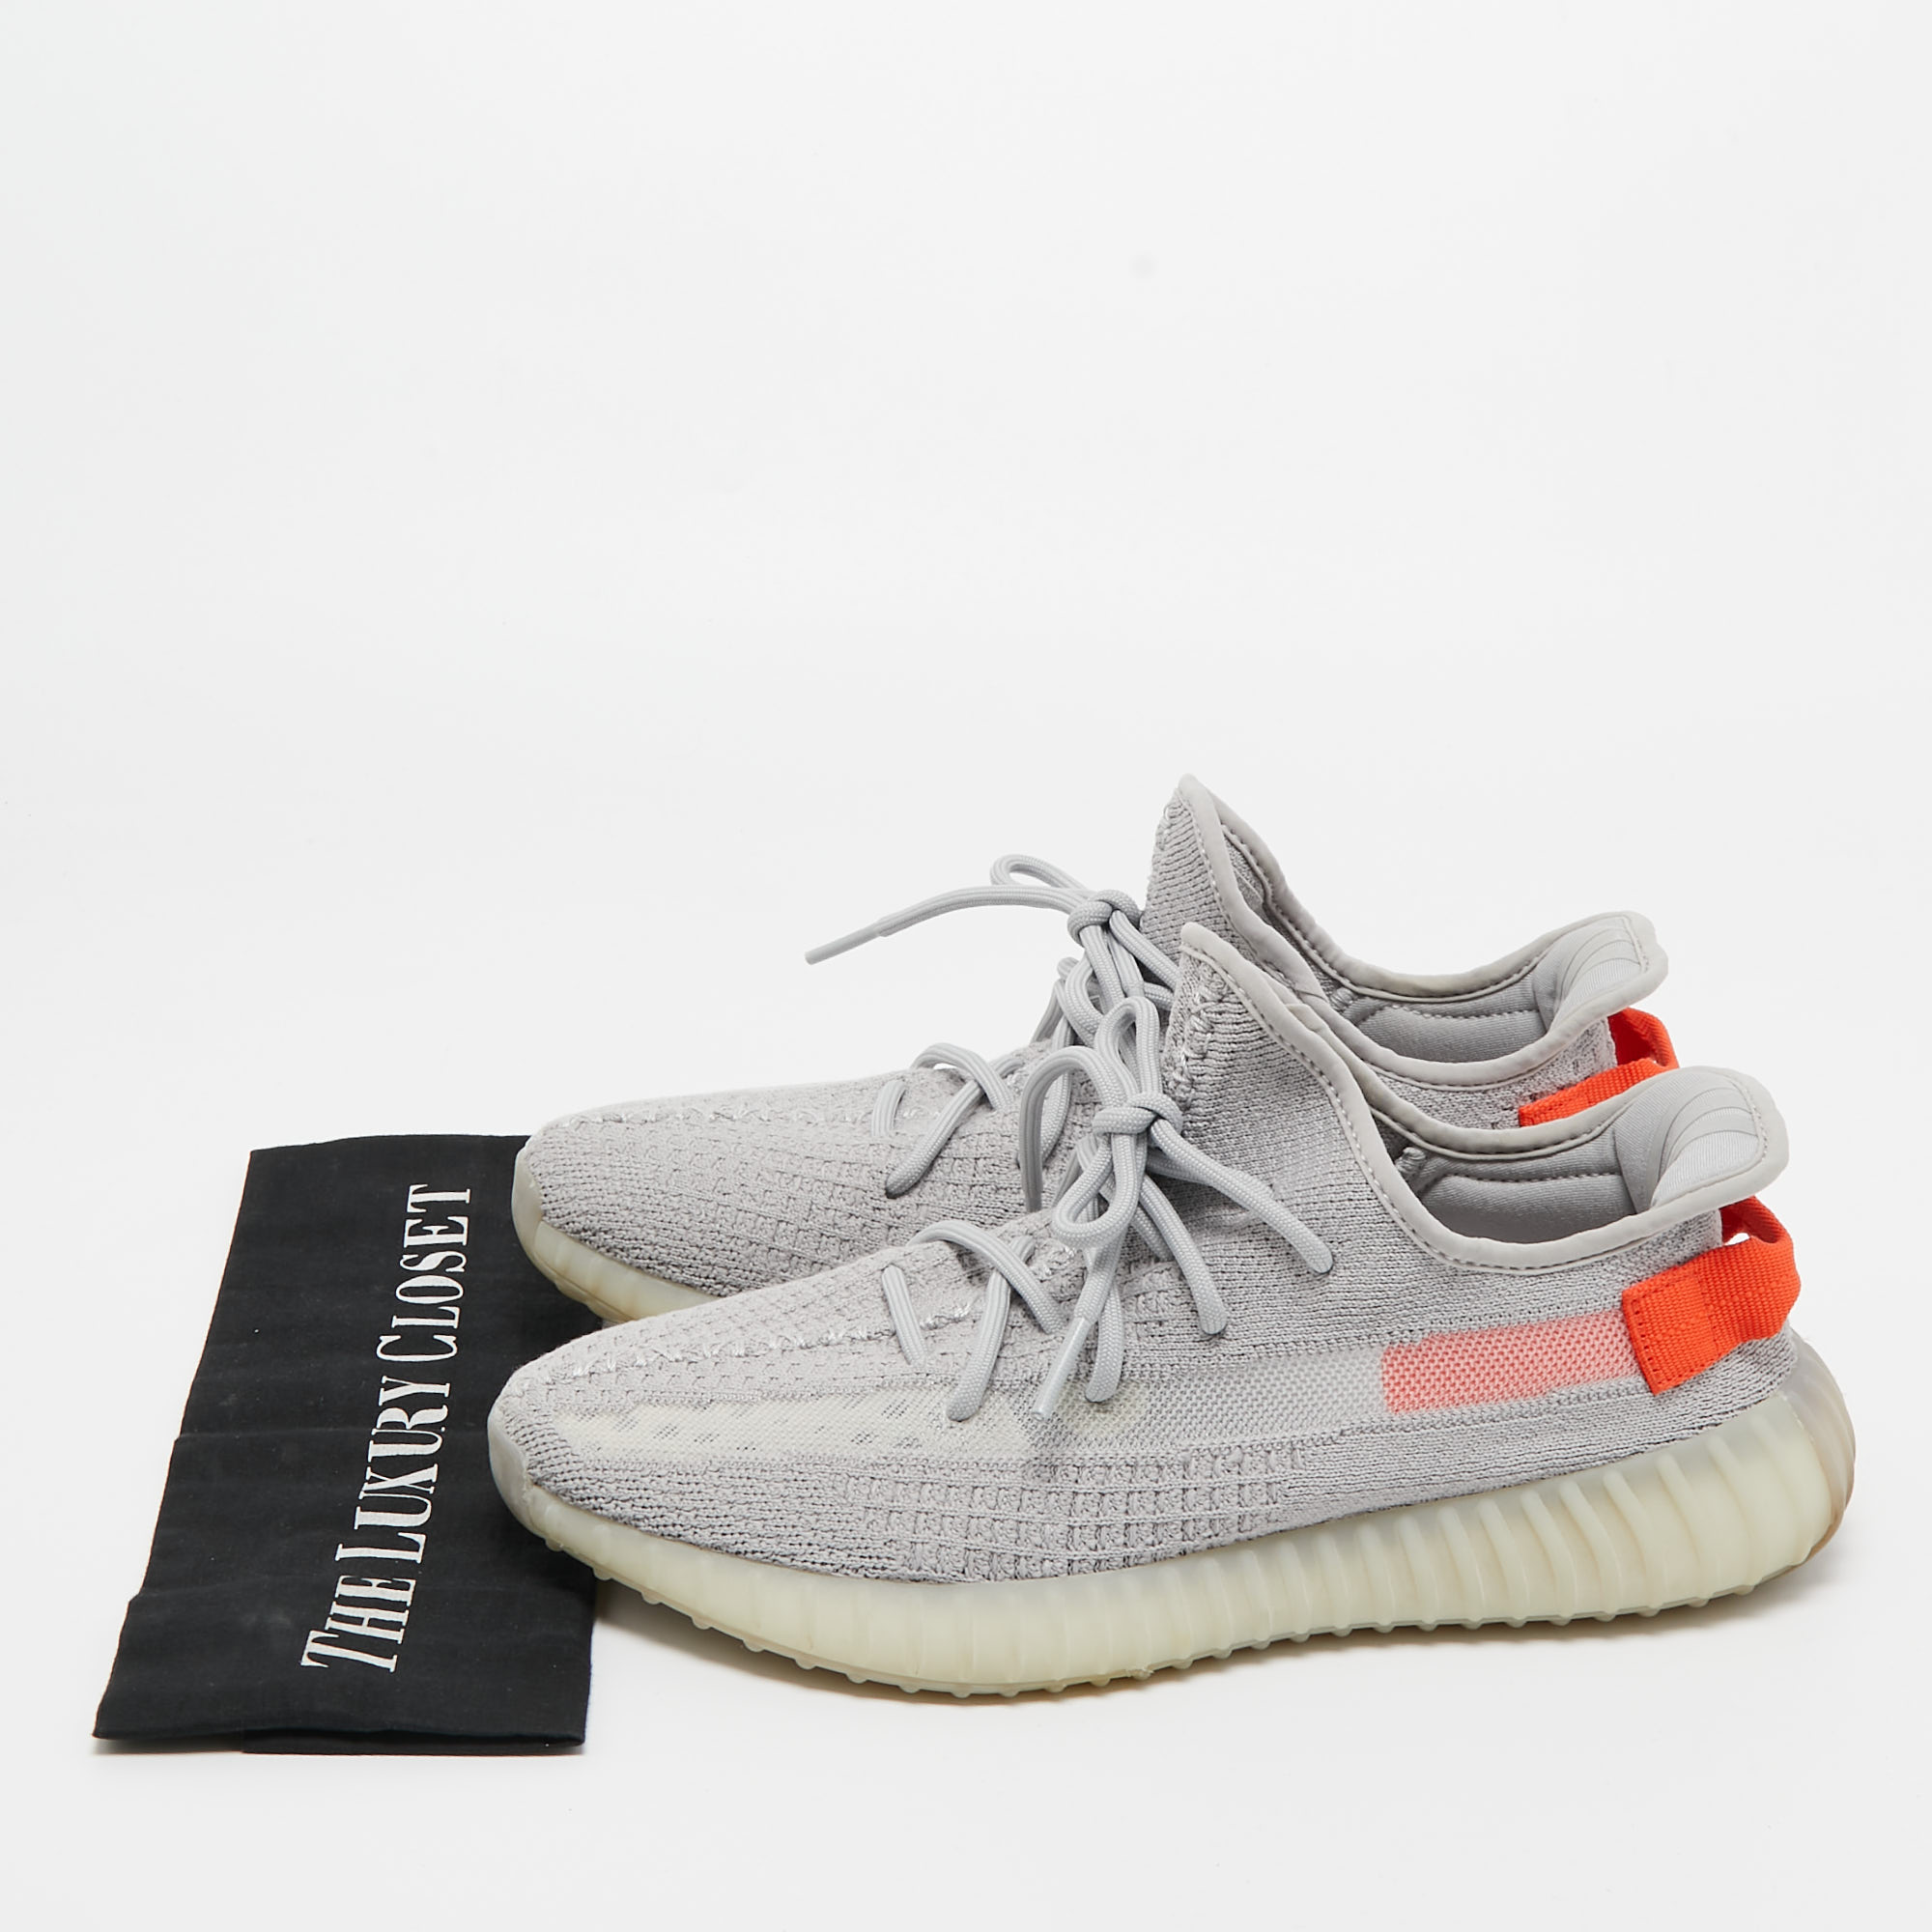 Adidas X Yeezy Grey Knit Fabric Boost-350-v2-tail-light Sneakers Size 43 1/3